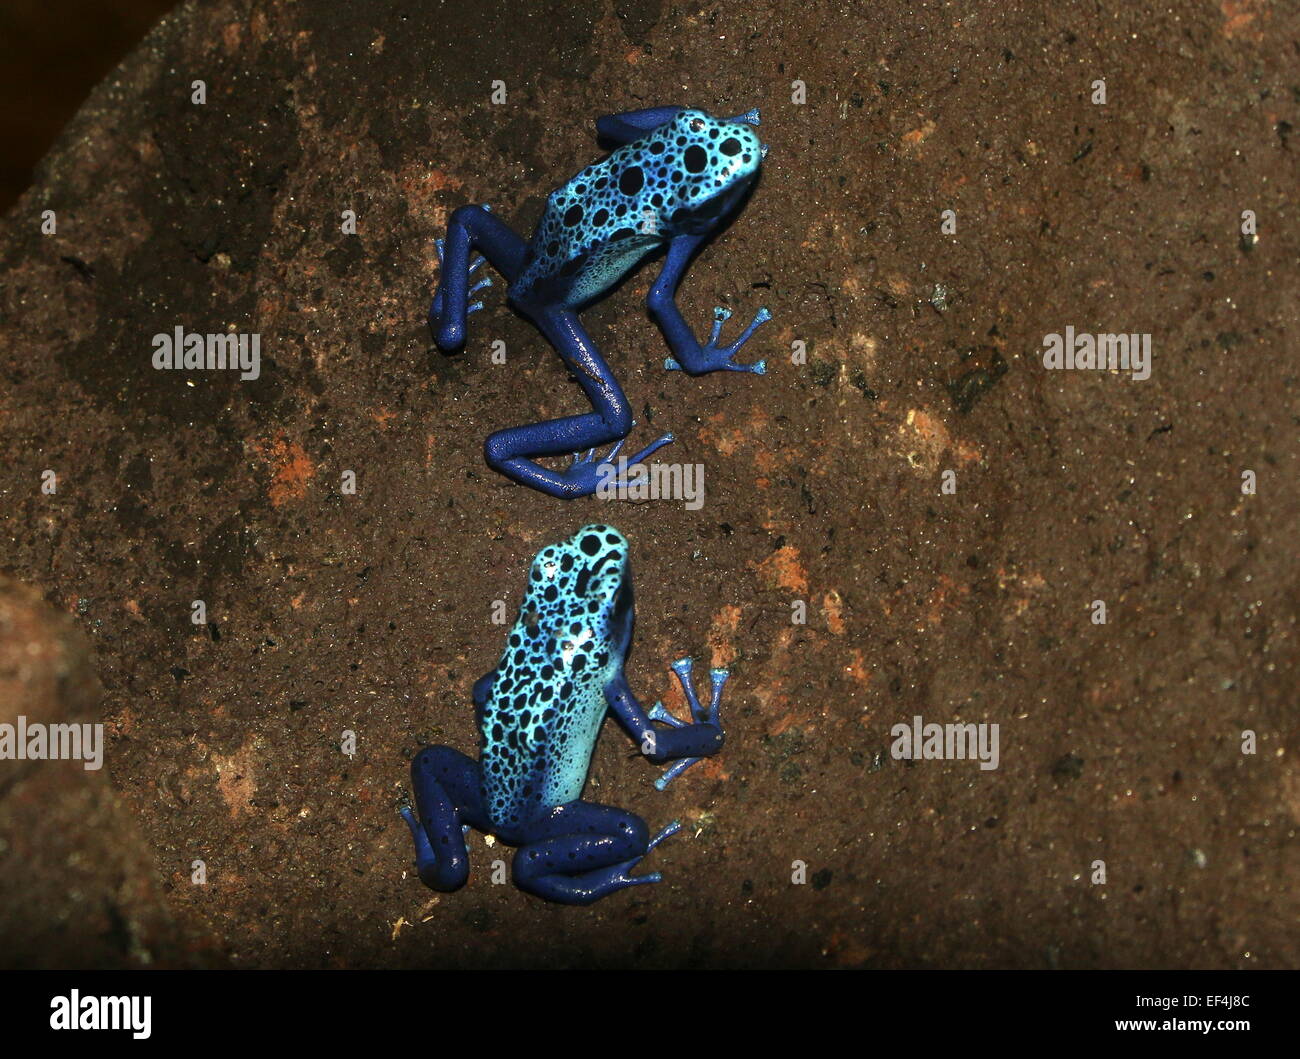 Pair of two bright blue South American Blue poison dart frogs or arrow  frogs (Dentrobates tinctorius azureus) posing together Stock Photo - Alamy